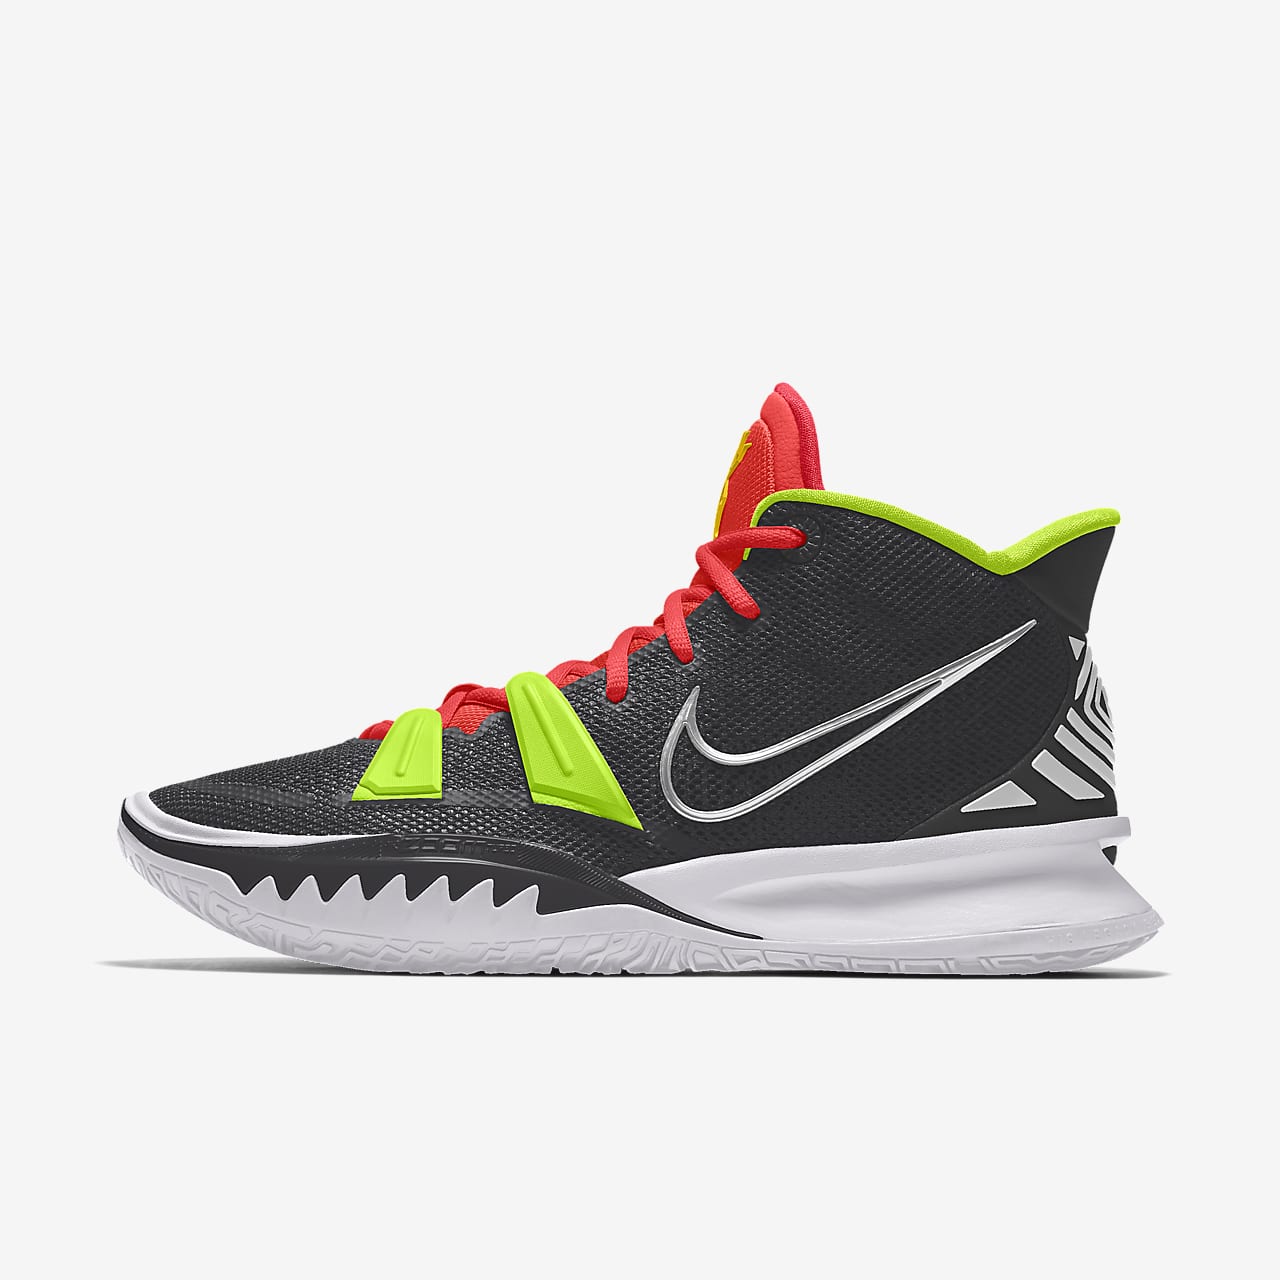 kyrie irving bball shoes